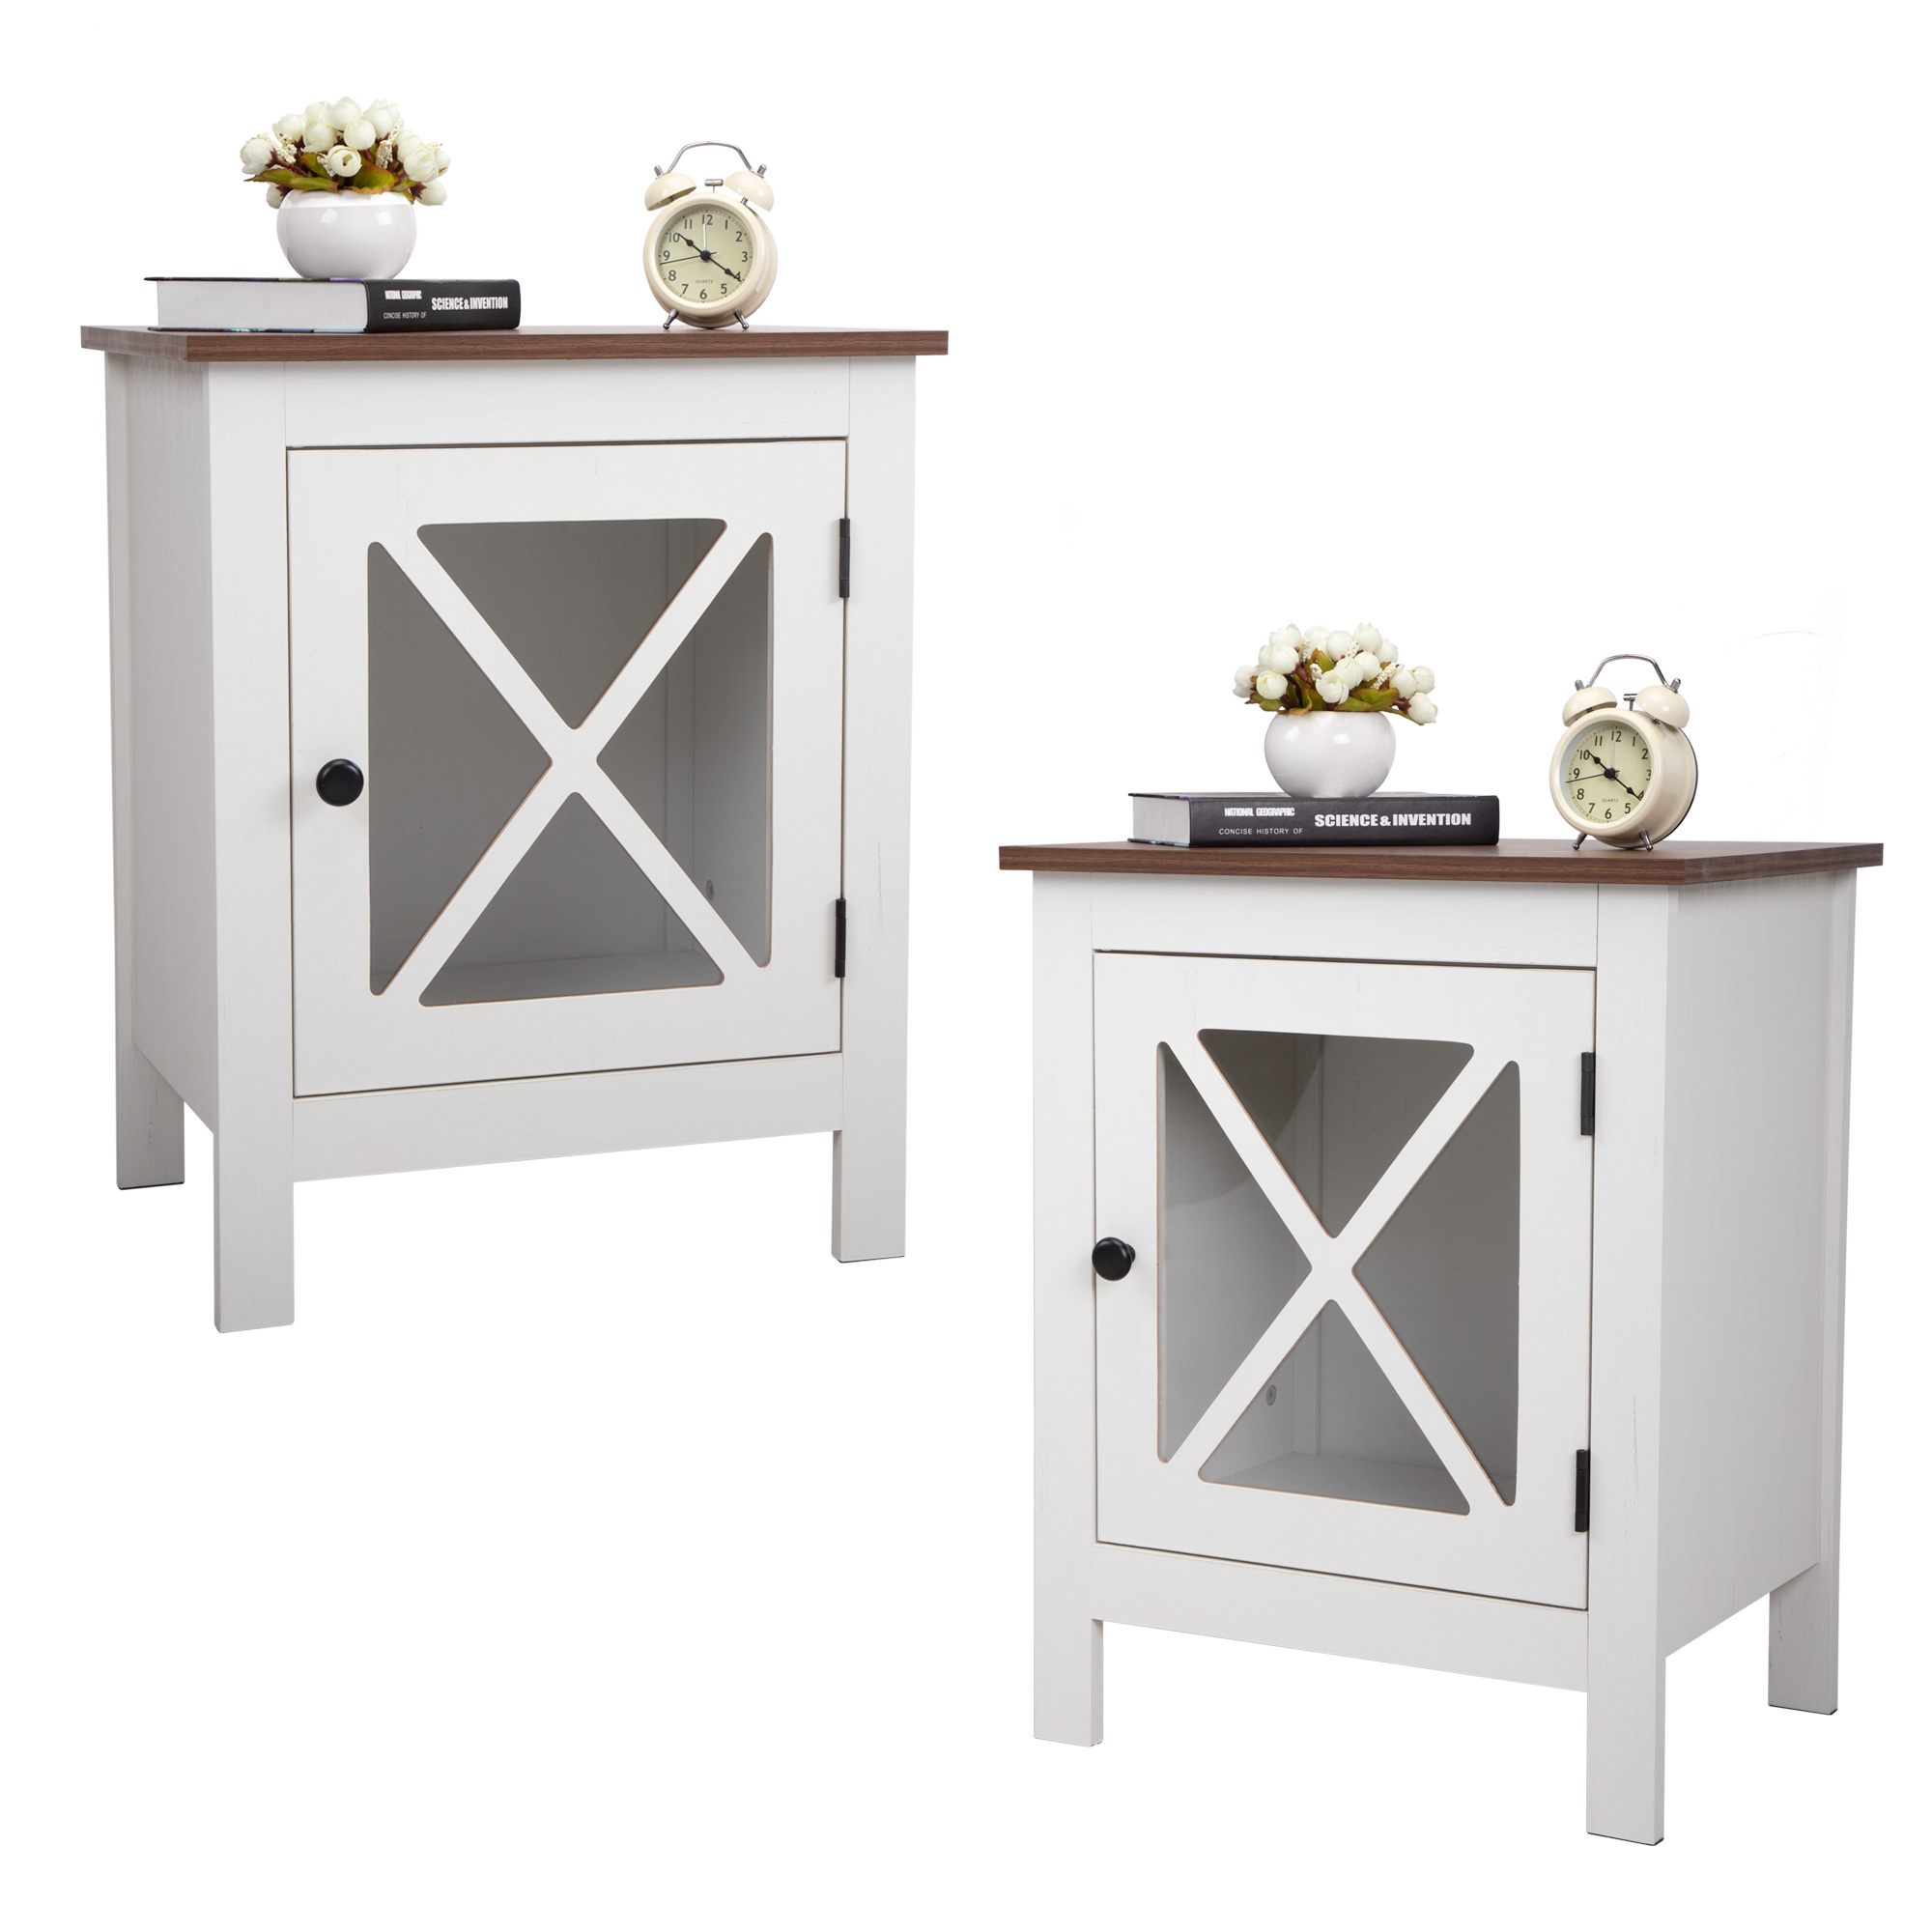 Industrial Nightstand Side Table End Table with X design glass Door - White  Walnut 2 pieces-Boyel Living